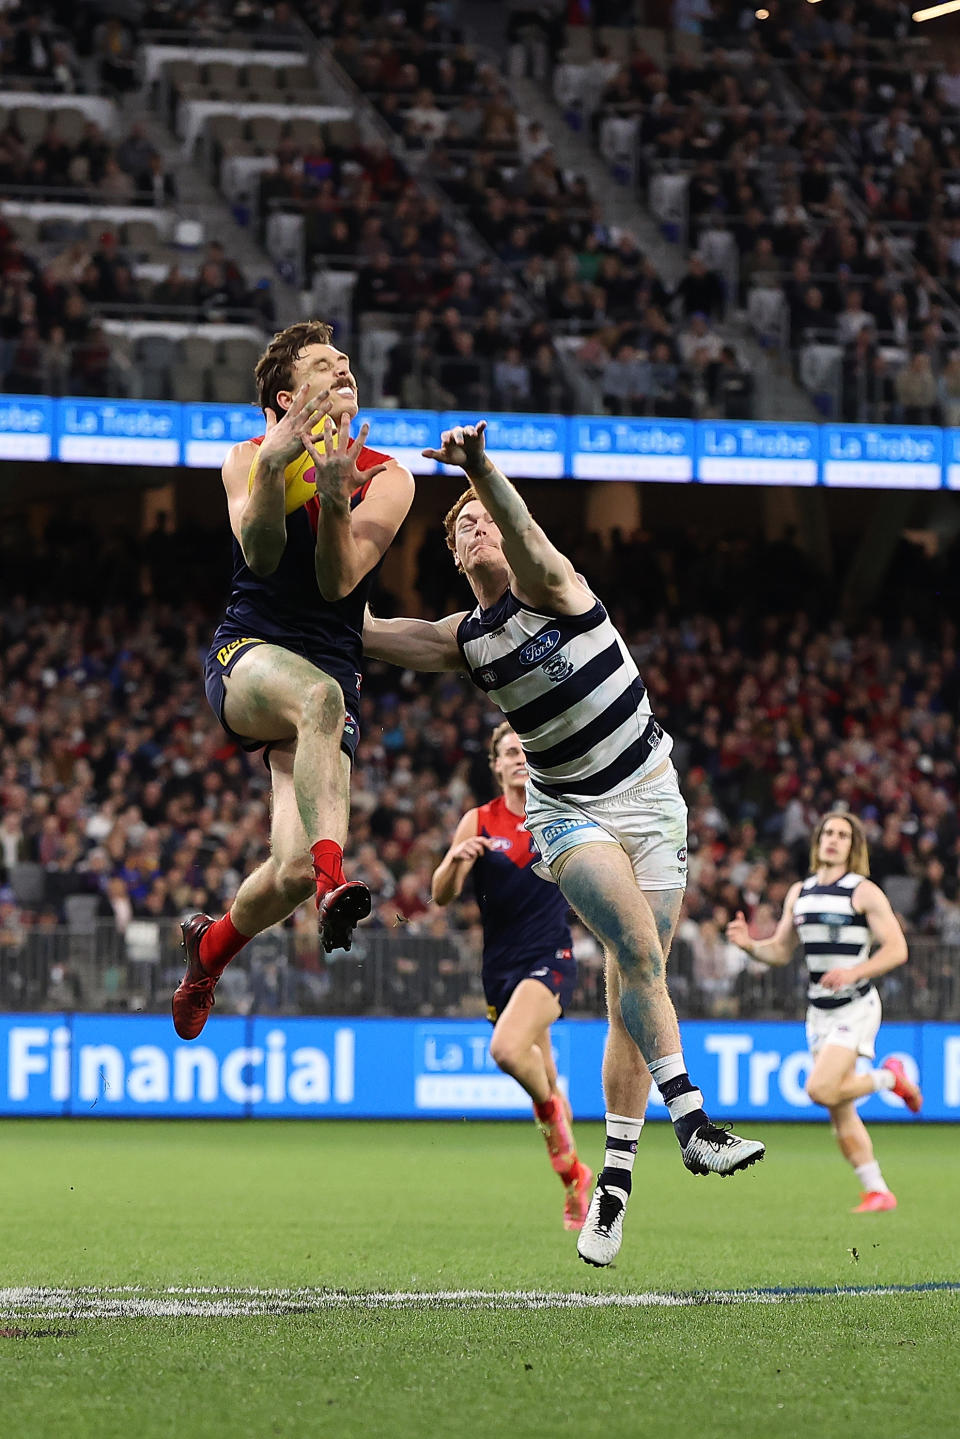 Jake Lever marks the ball against Gary Rohan of the Cats during the AFL First Preliminary Final match.